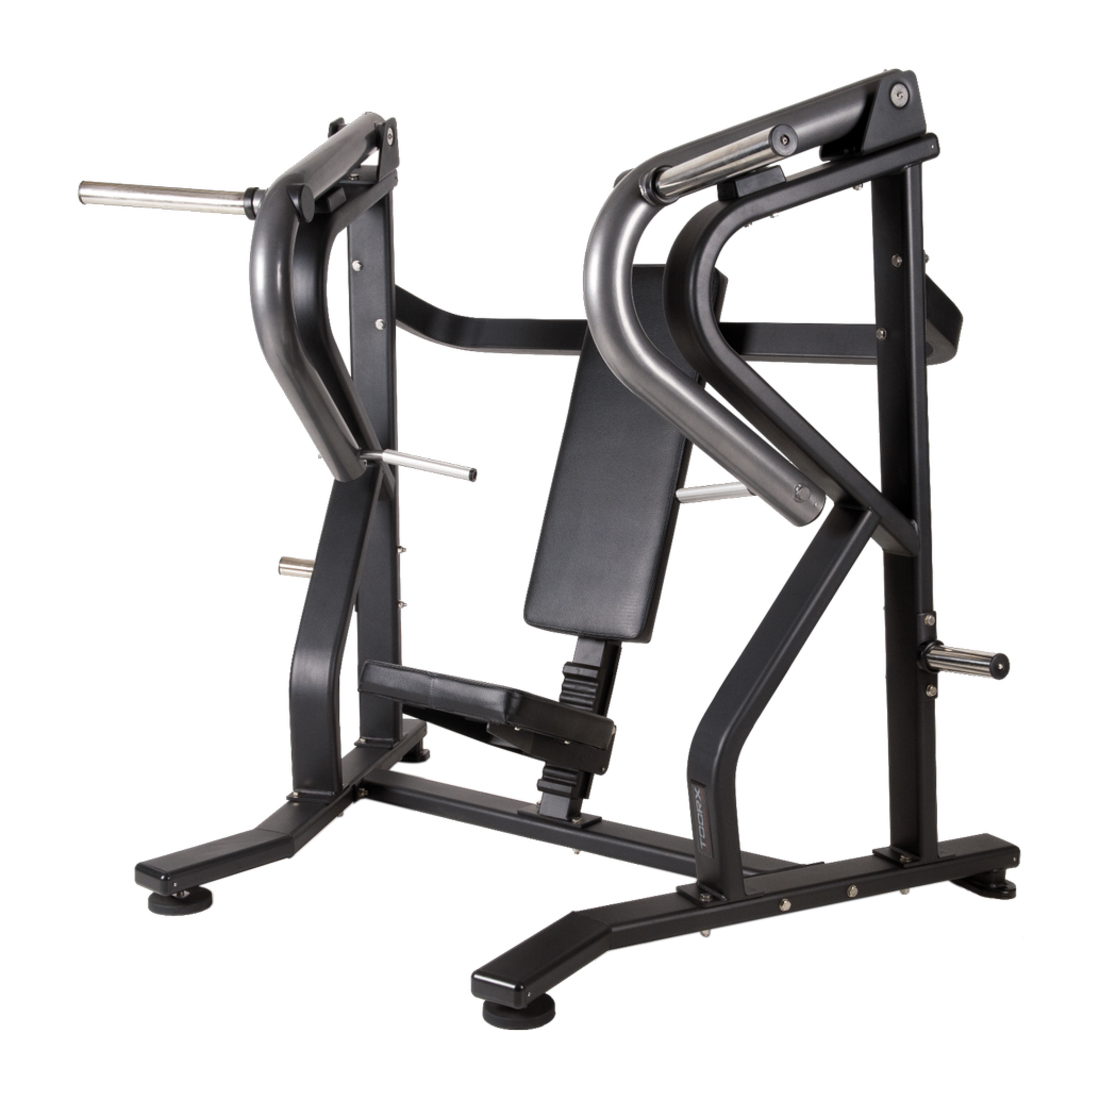 Toorx Chest press plate loaded FWX-5800  FWX-5800